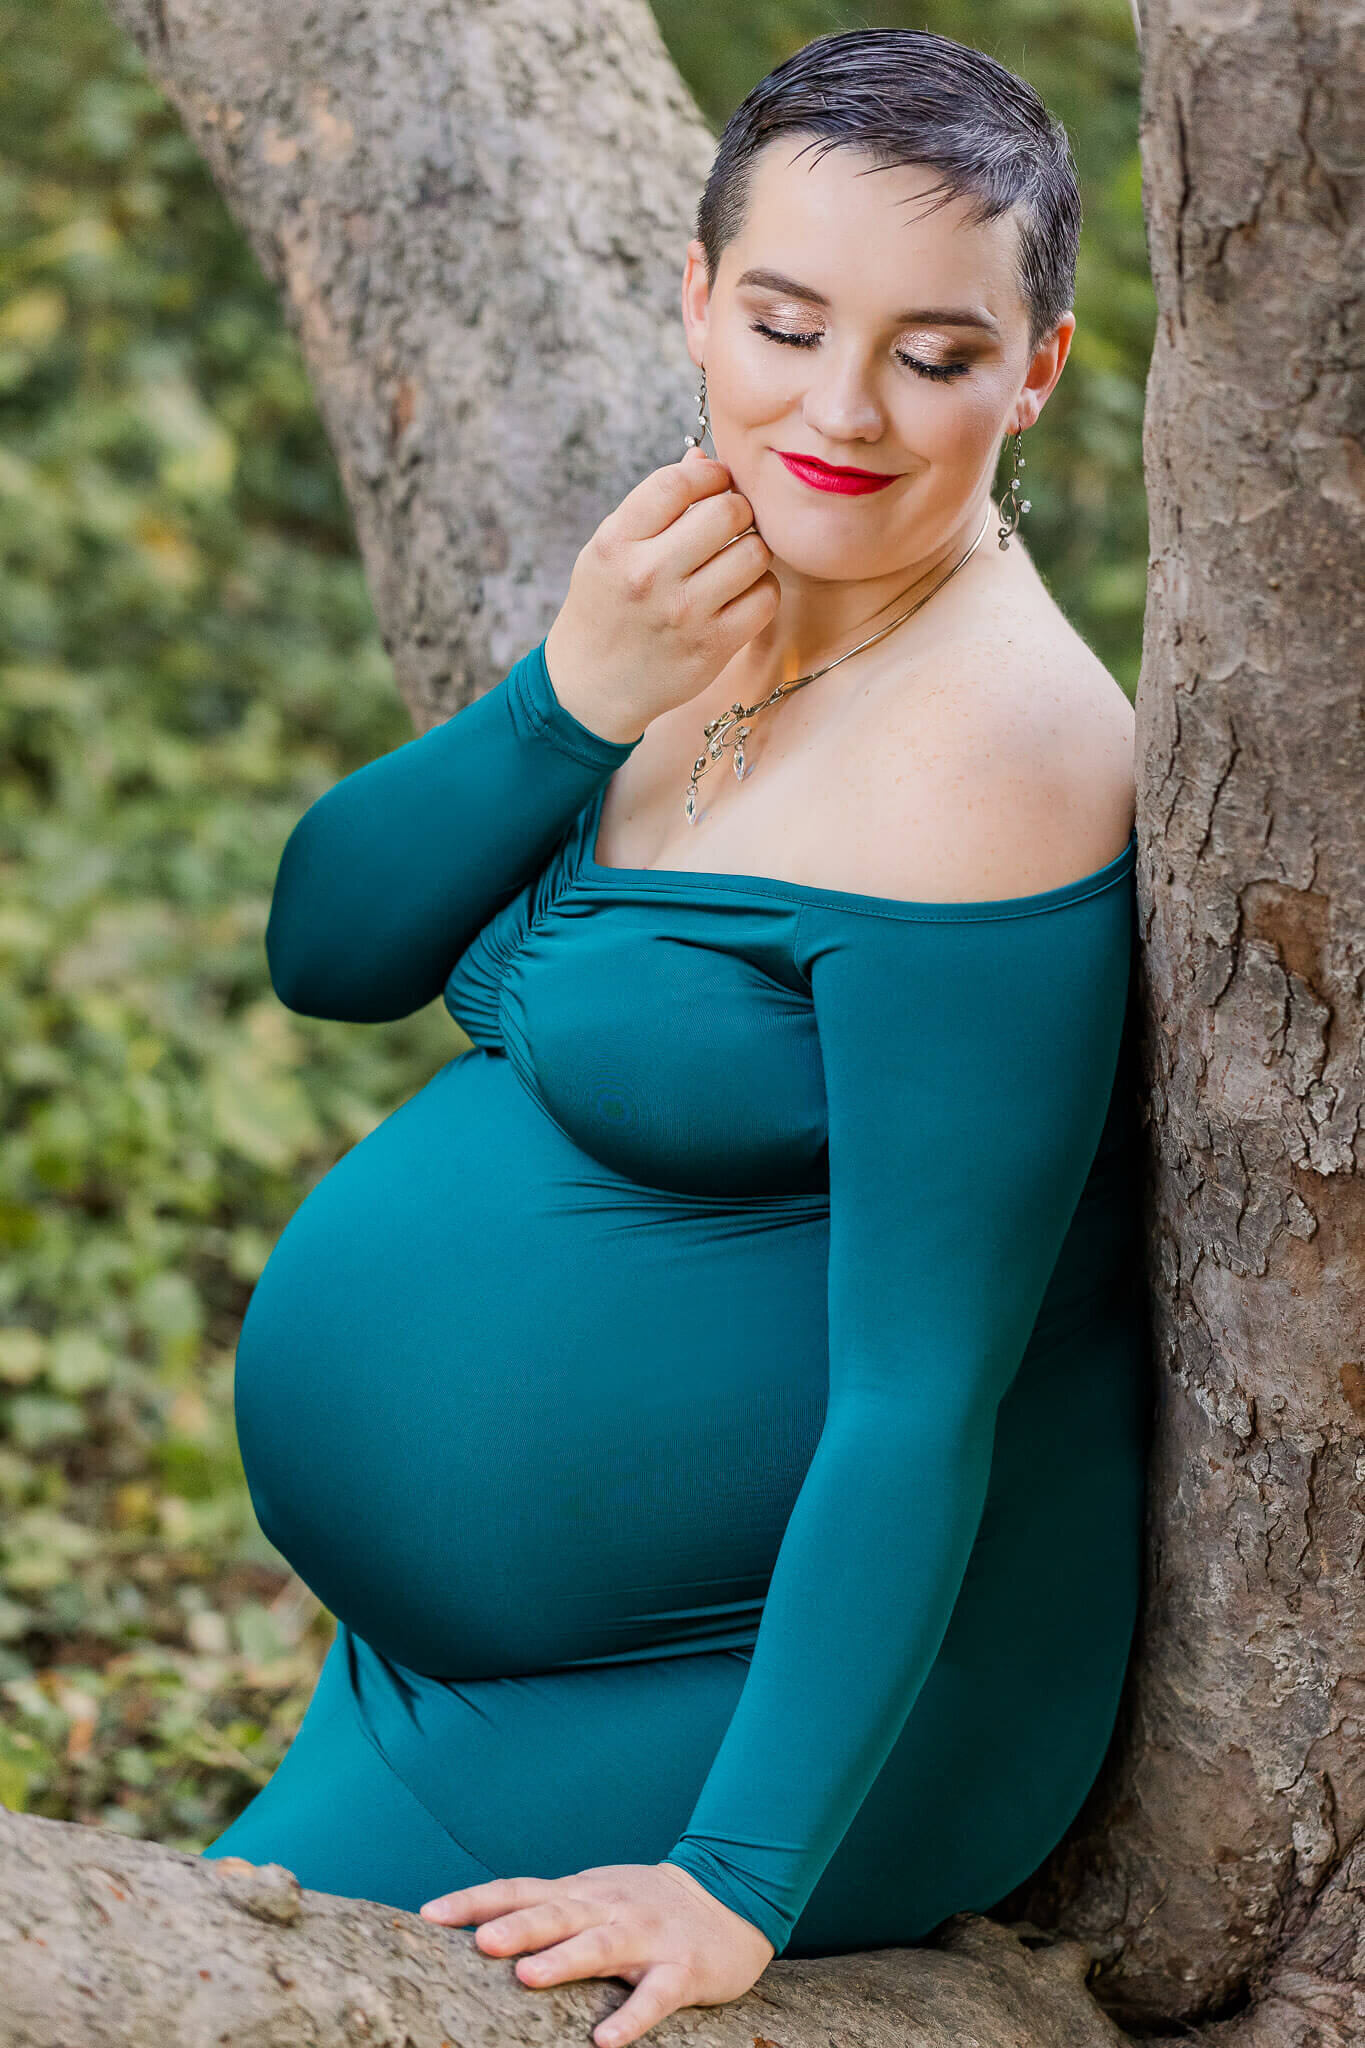 A woman sitting in a tree wearing a teal dress during her maternity photos at an Alexandria park.